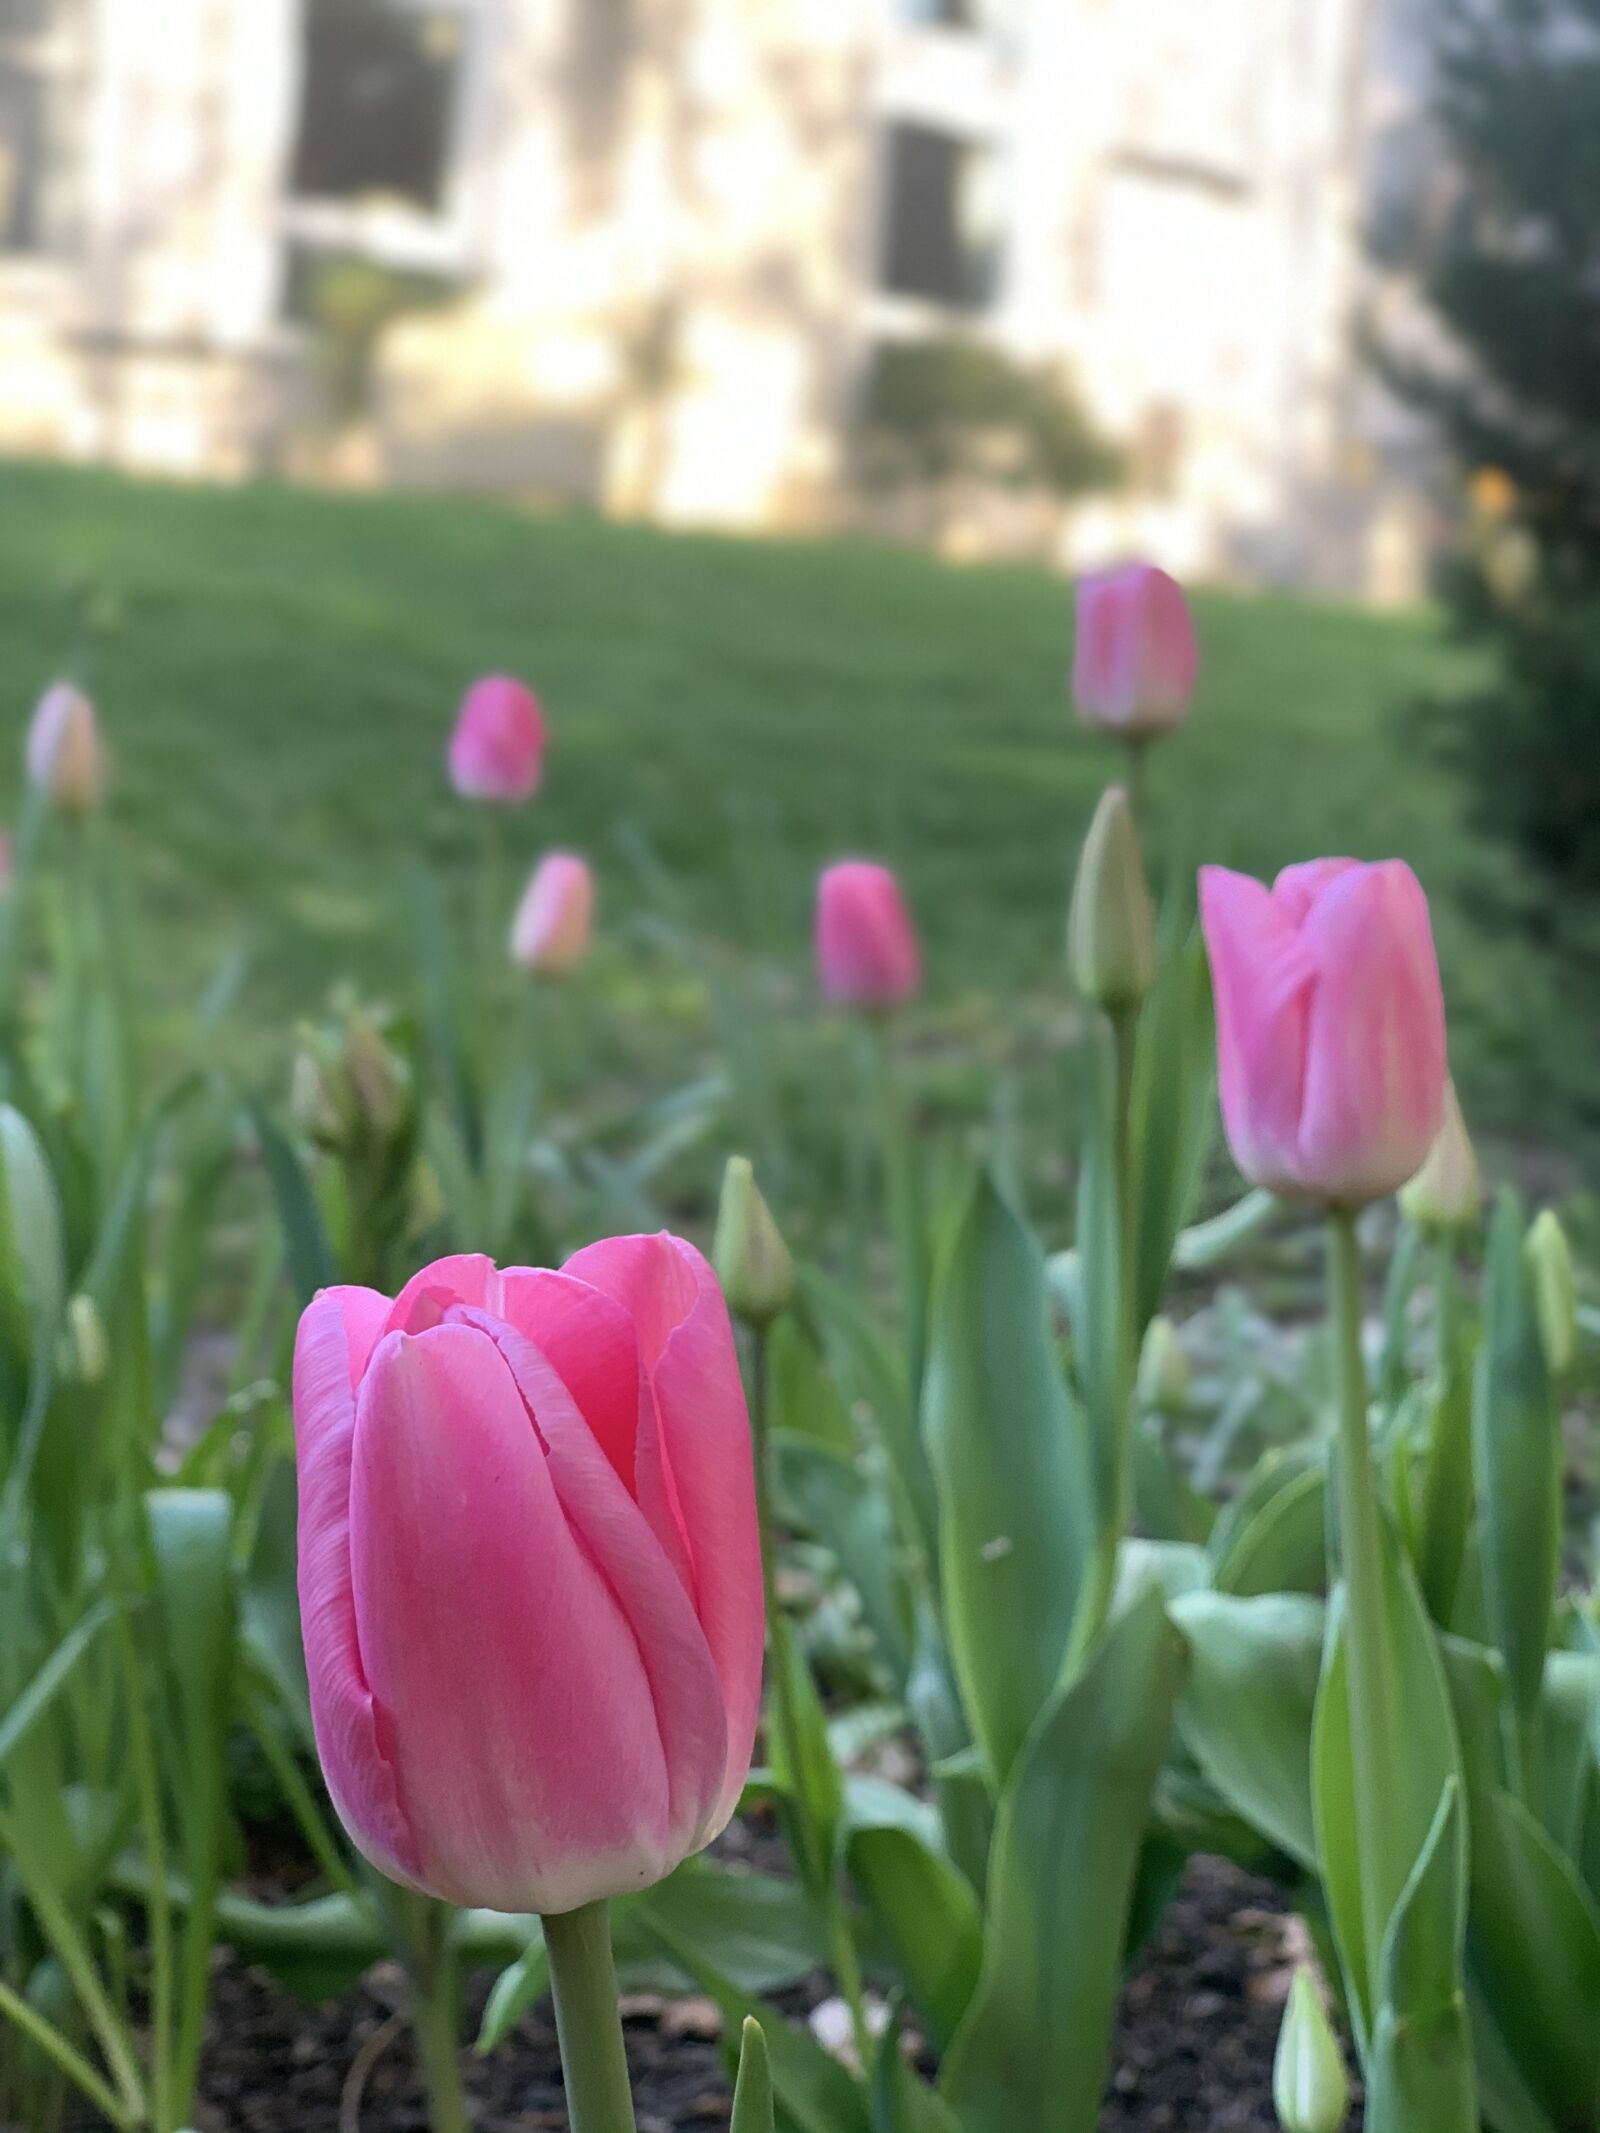 Apple iPhone XS + iPhone XS back dual camera 6mm f/2.4 sample photo. Flowers, tulips, tulip photography